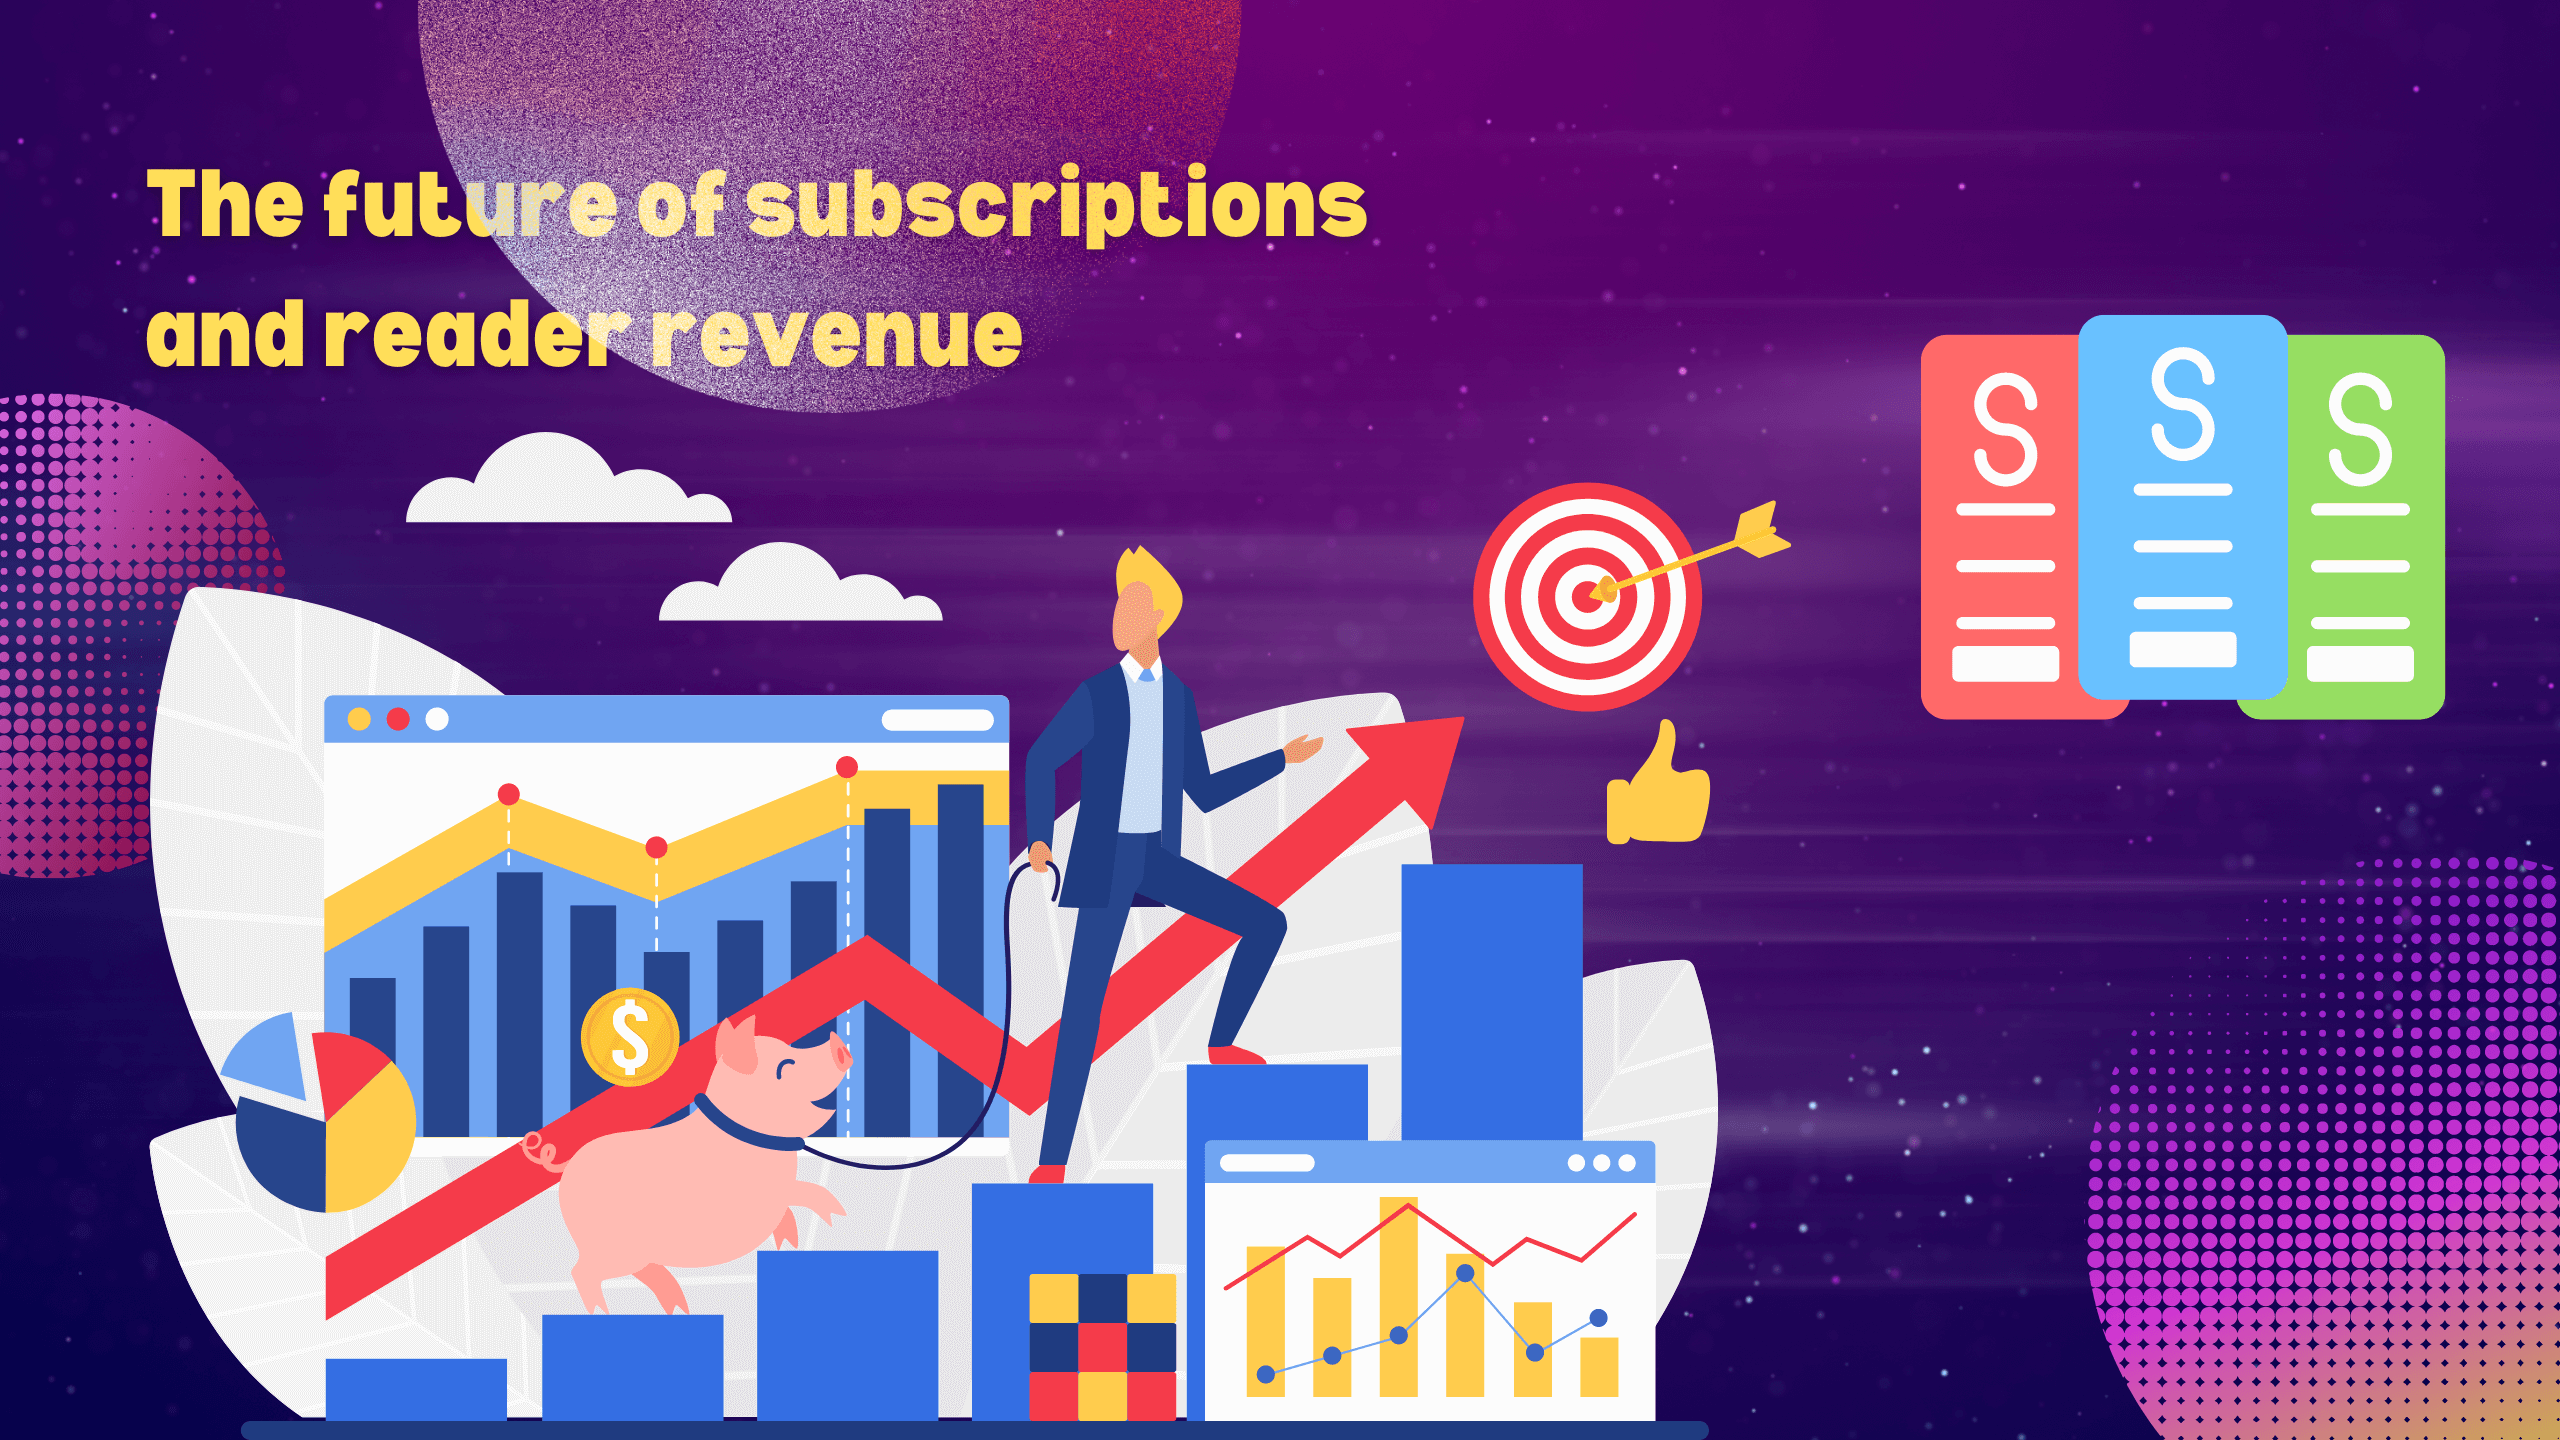 The future of subscriptions and reader revenue